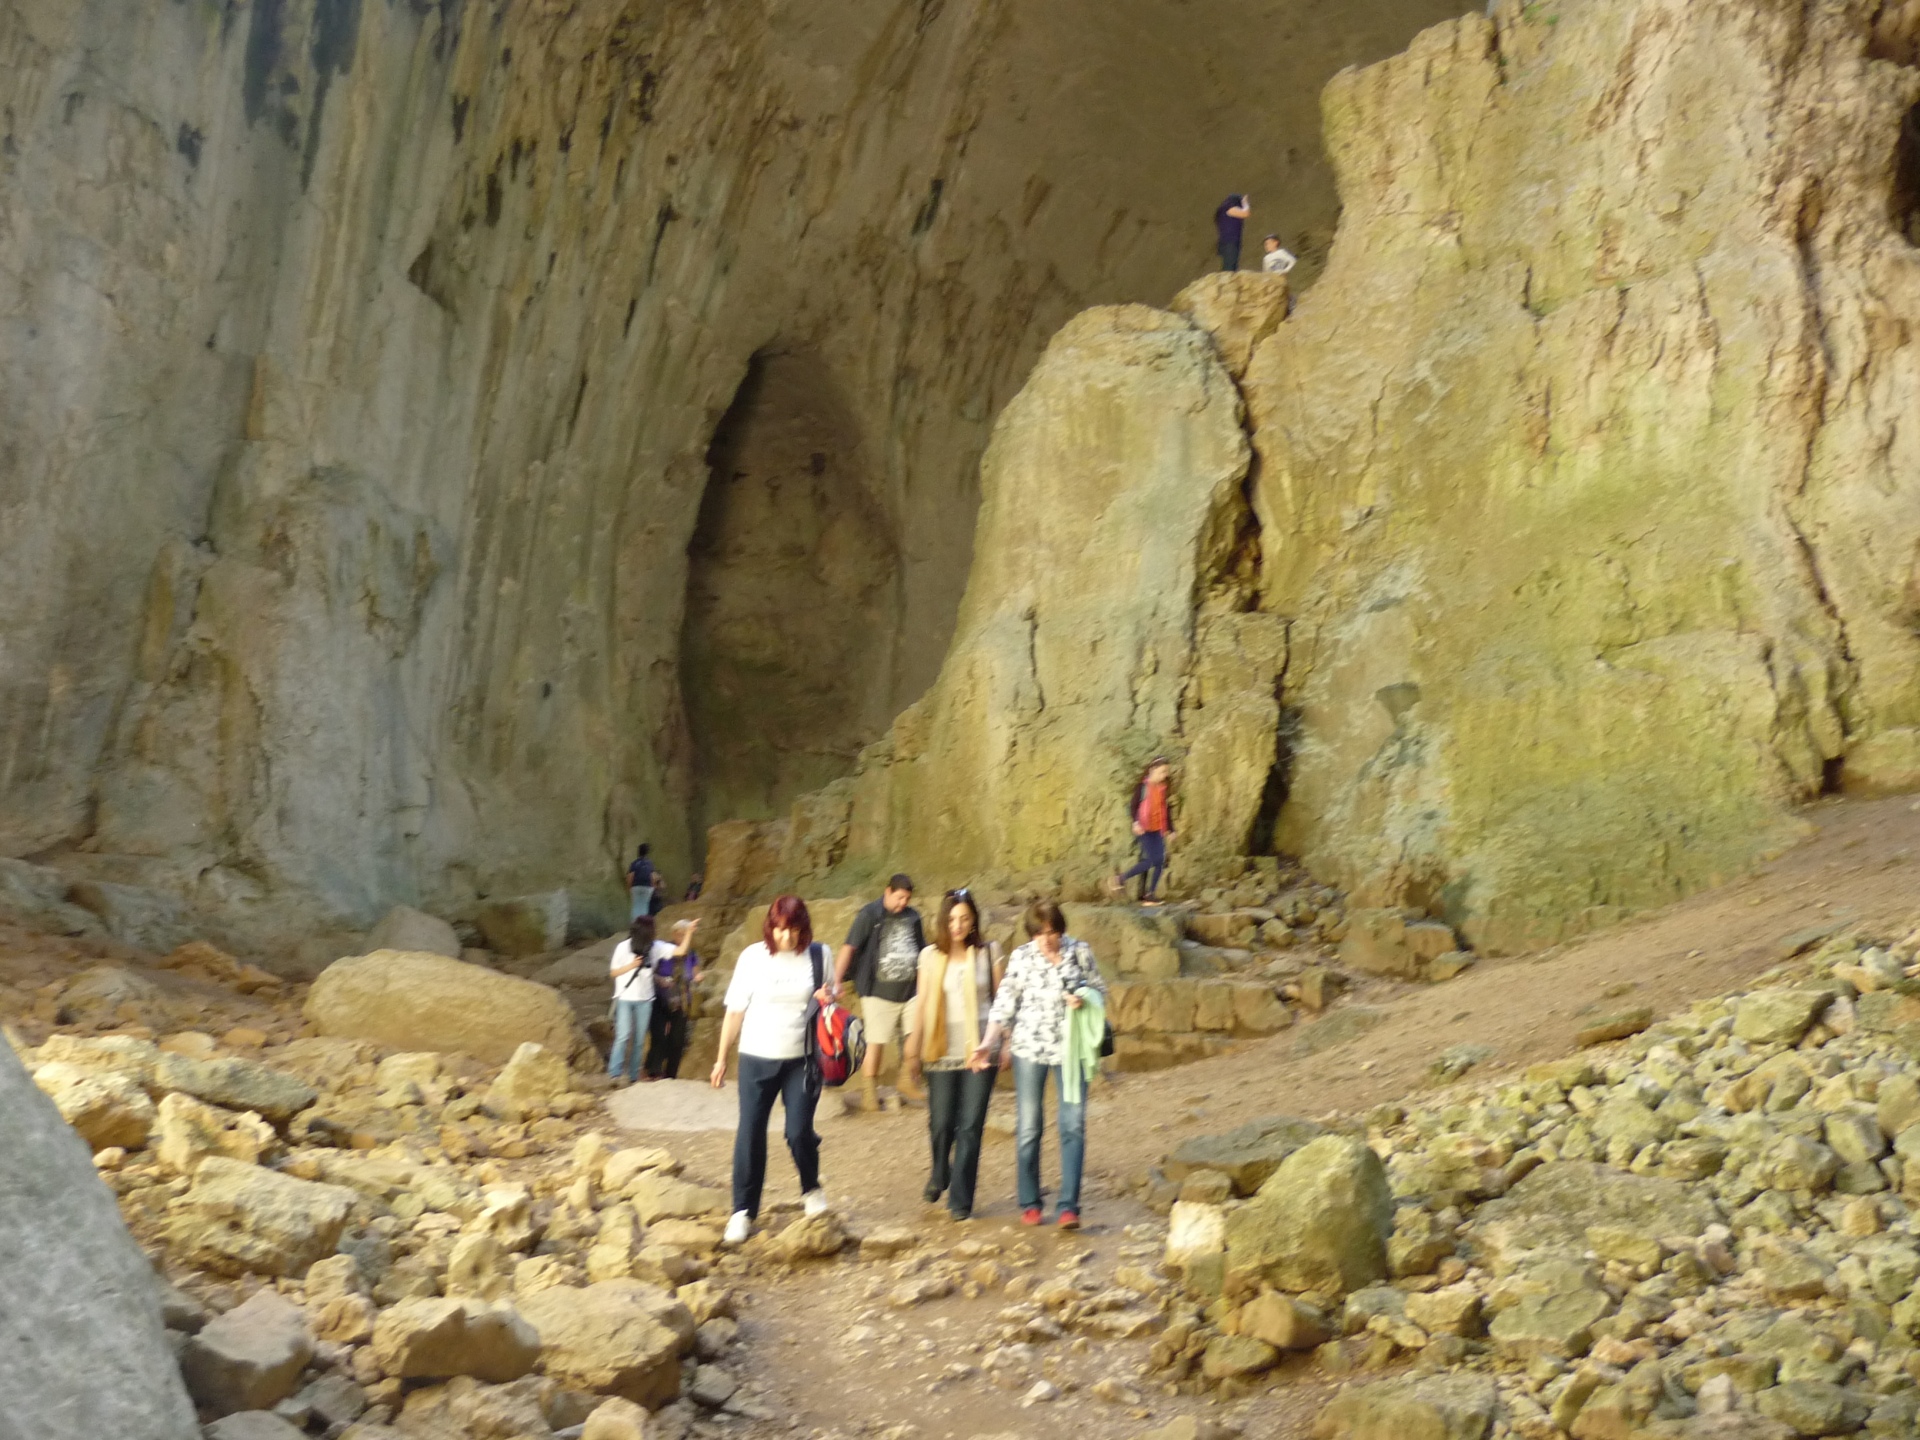 Excursion to the Prohodna Cave (God’s Eyes) on 18th May 2018